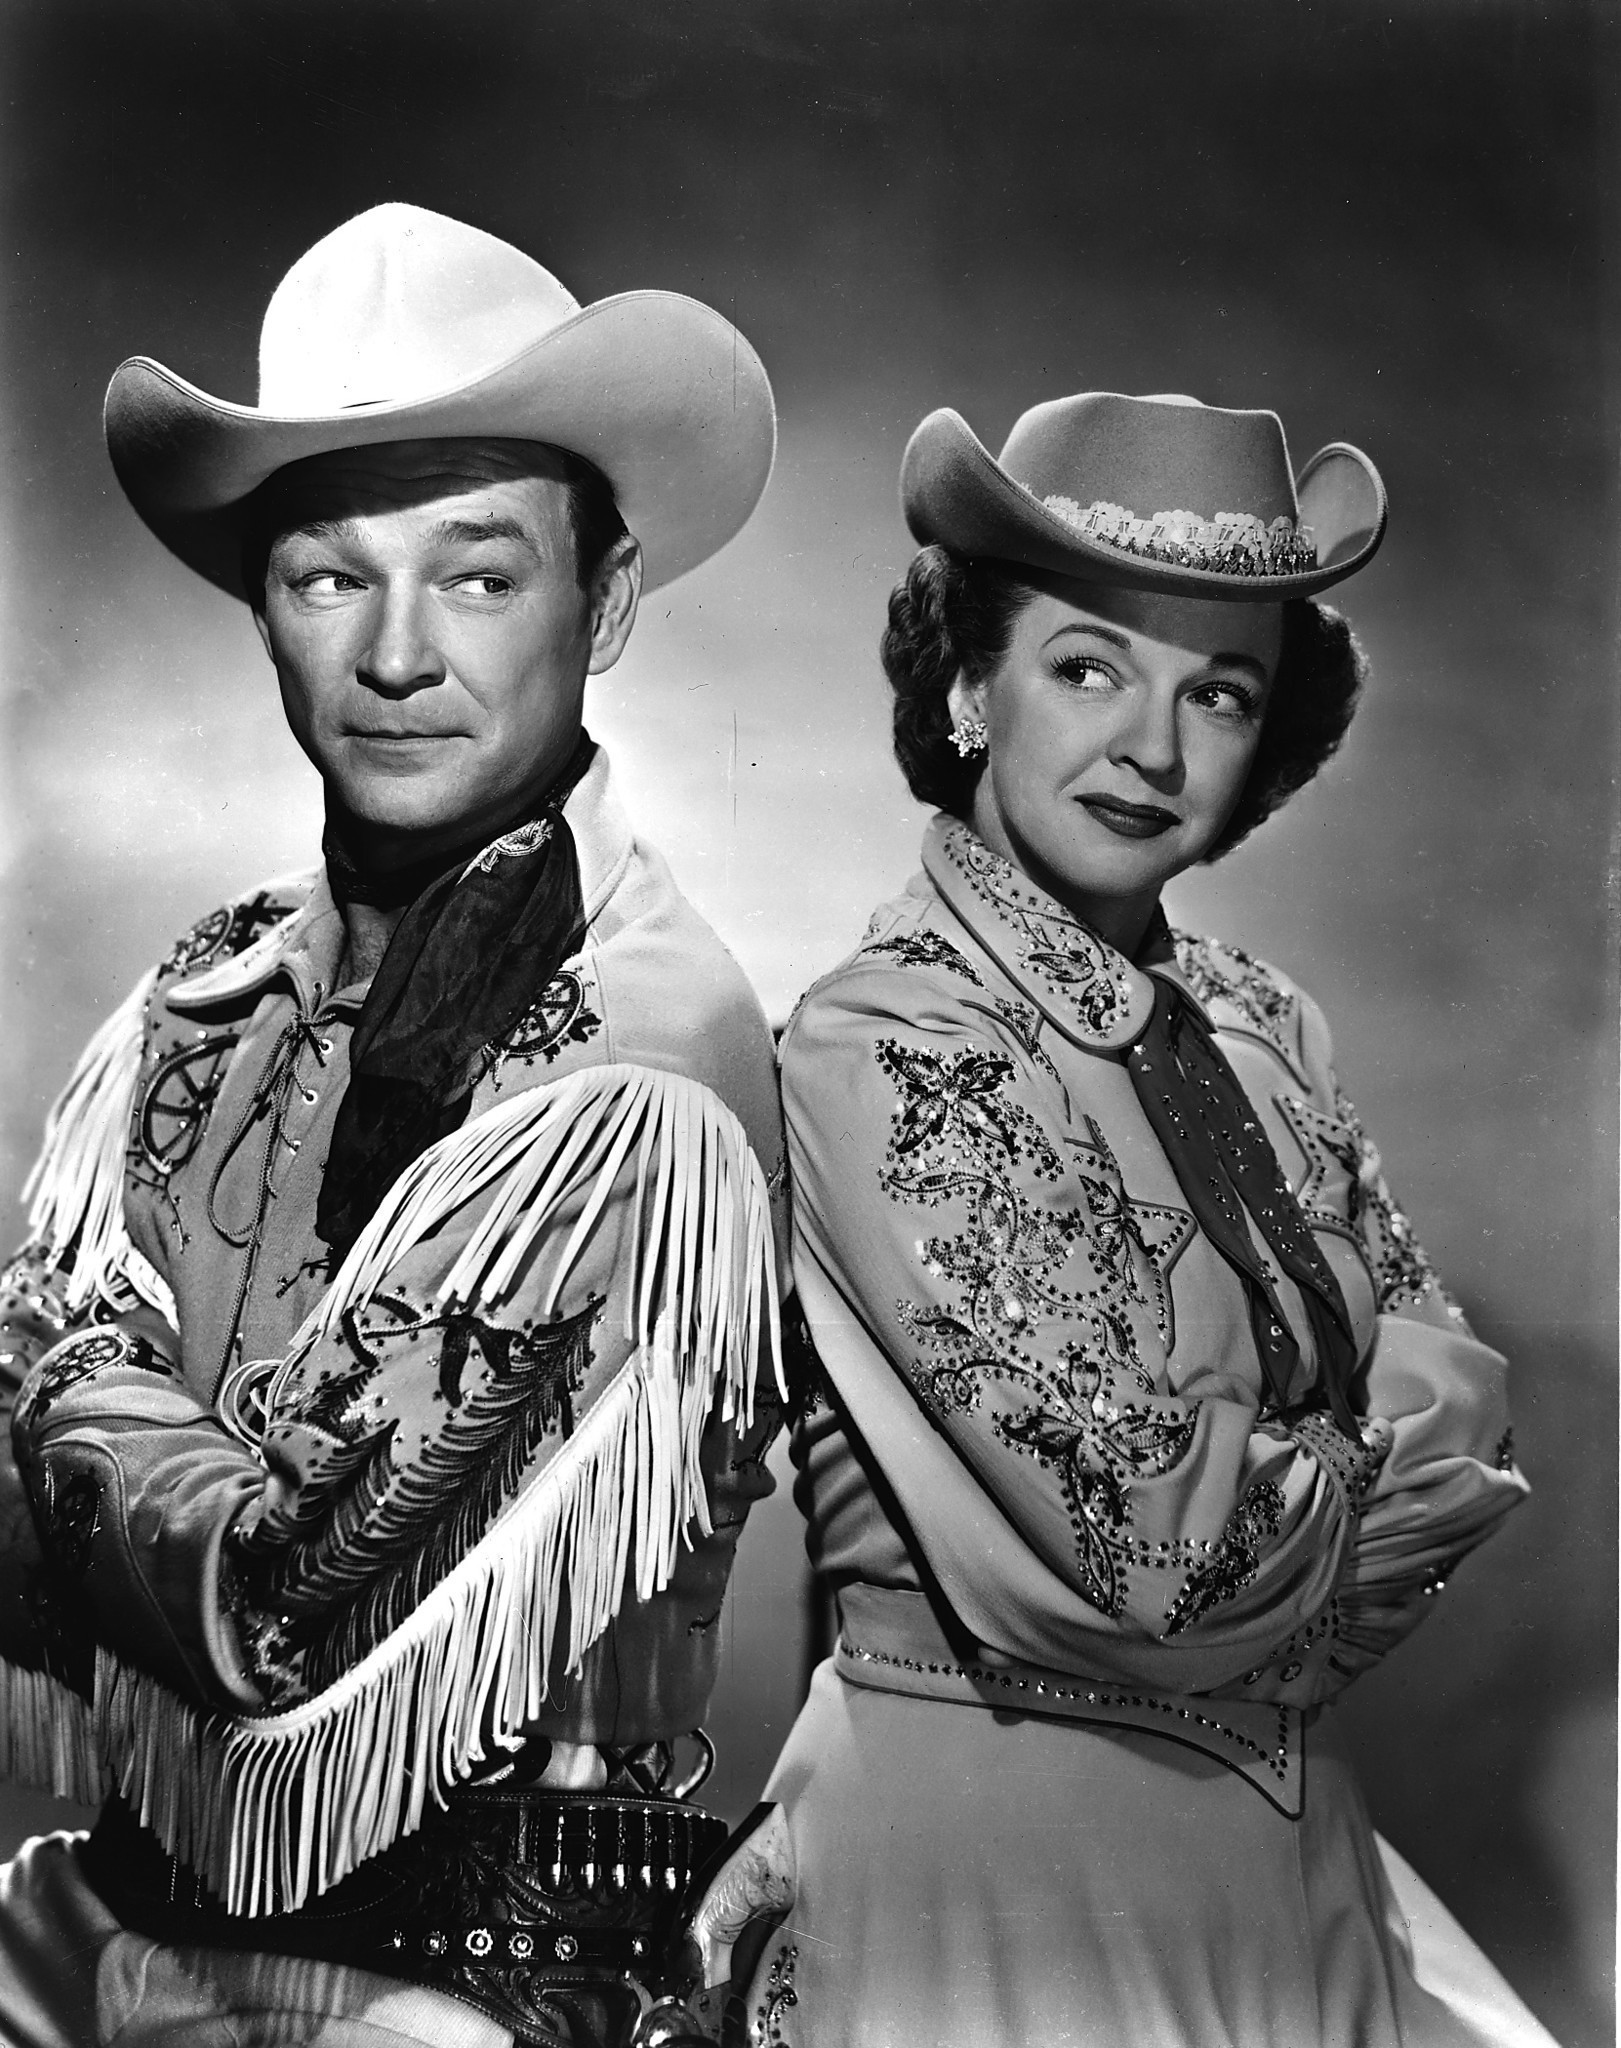 Dale and Roy. Roy Evans Family. Roy Rogers Graceland. Роджер дэйл флойд